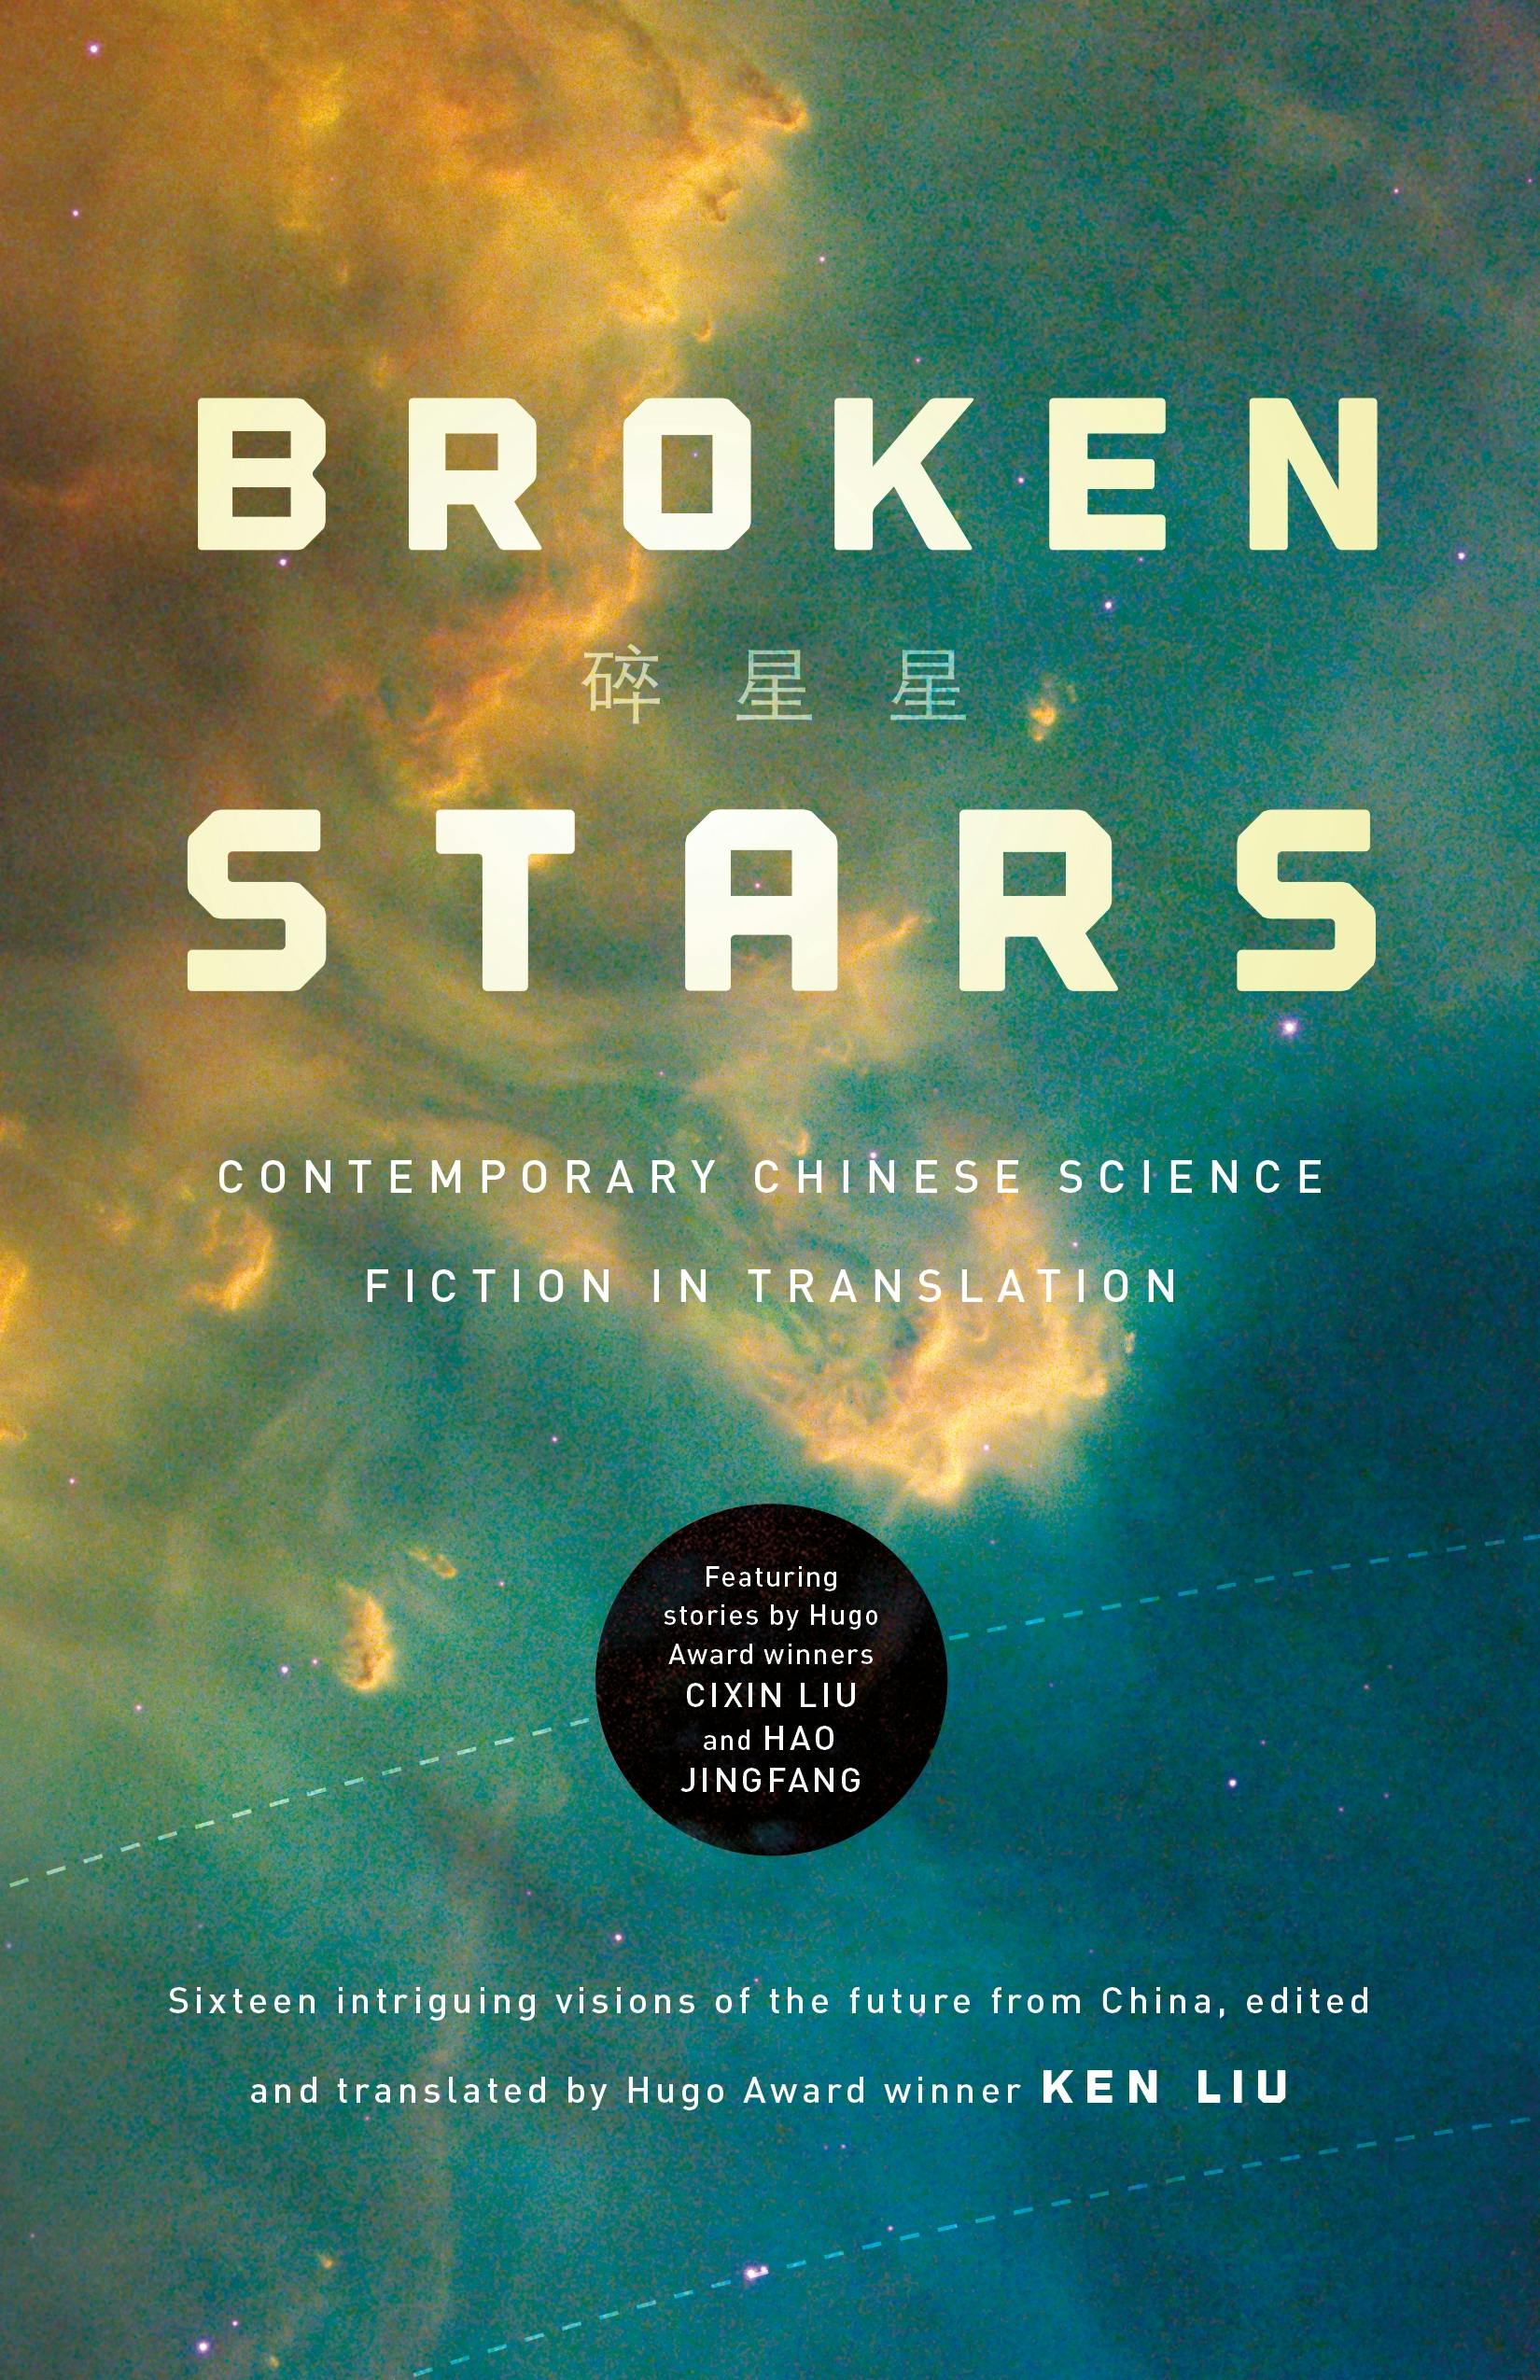 Cover for the book titled as: Broken Stars